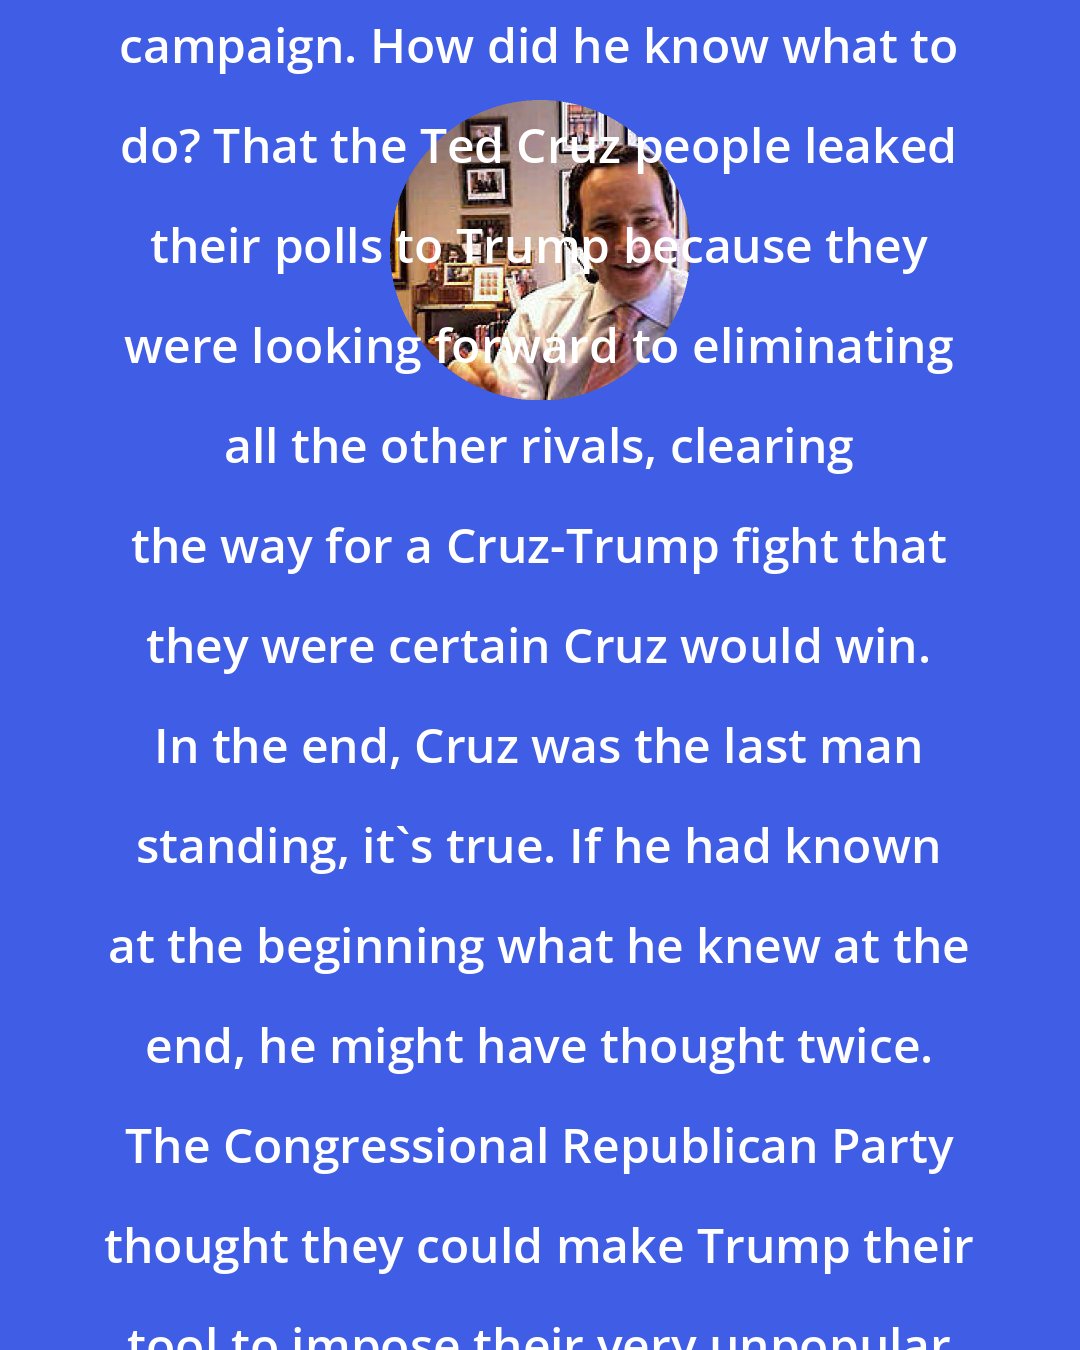 David Frum: Donald Trump didn't have a polling operation until very late in his campaign. How did he know what to do? That the Ted Cruz people leaked their polls to Trump because they were looking forward to eliminating all the other rivals, clearing the way for a Cruz-Trump fight that they were certain Cruz would win. In the end, Cruz was the last man standing, it's true. If he had known at the beginning what he knew at the end, he might have thought twice. The Congressional Republican Party thought they could make Trump their tool to impose their very unpopular agenda. Instead, they became his tool.